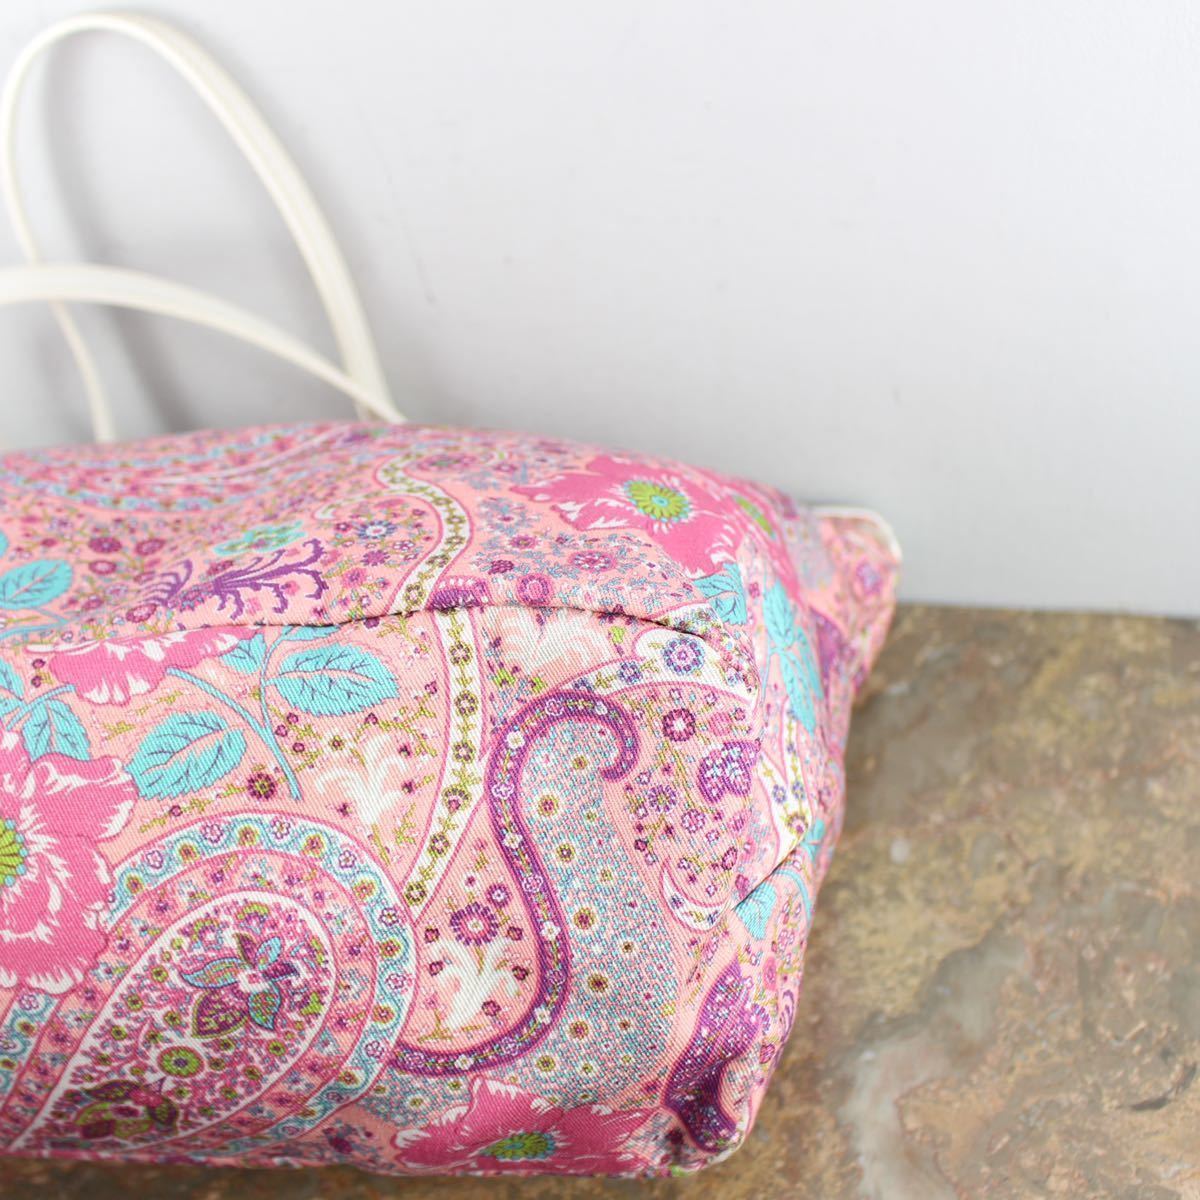 ETRO PAISLEY PATTERNED TOTE BAG MADE IN ITALYエトロペイズリー柄トートバッグ_画像6